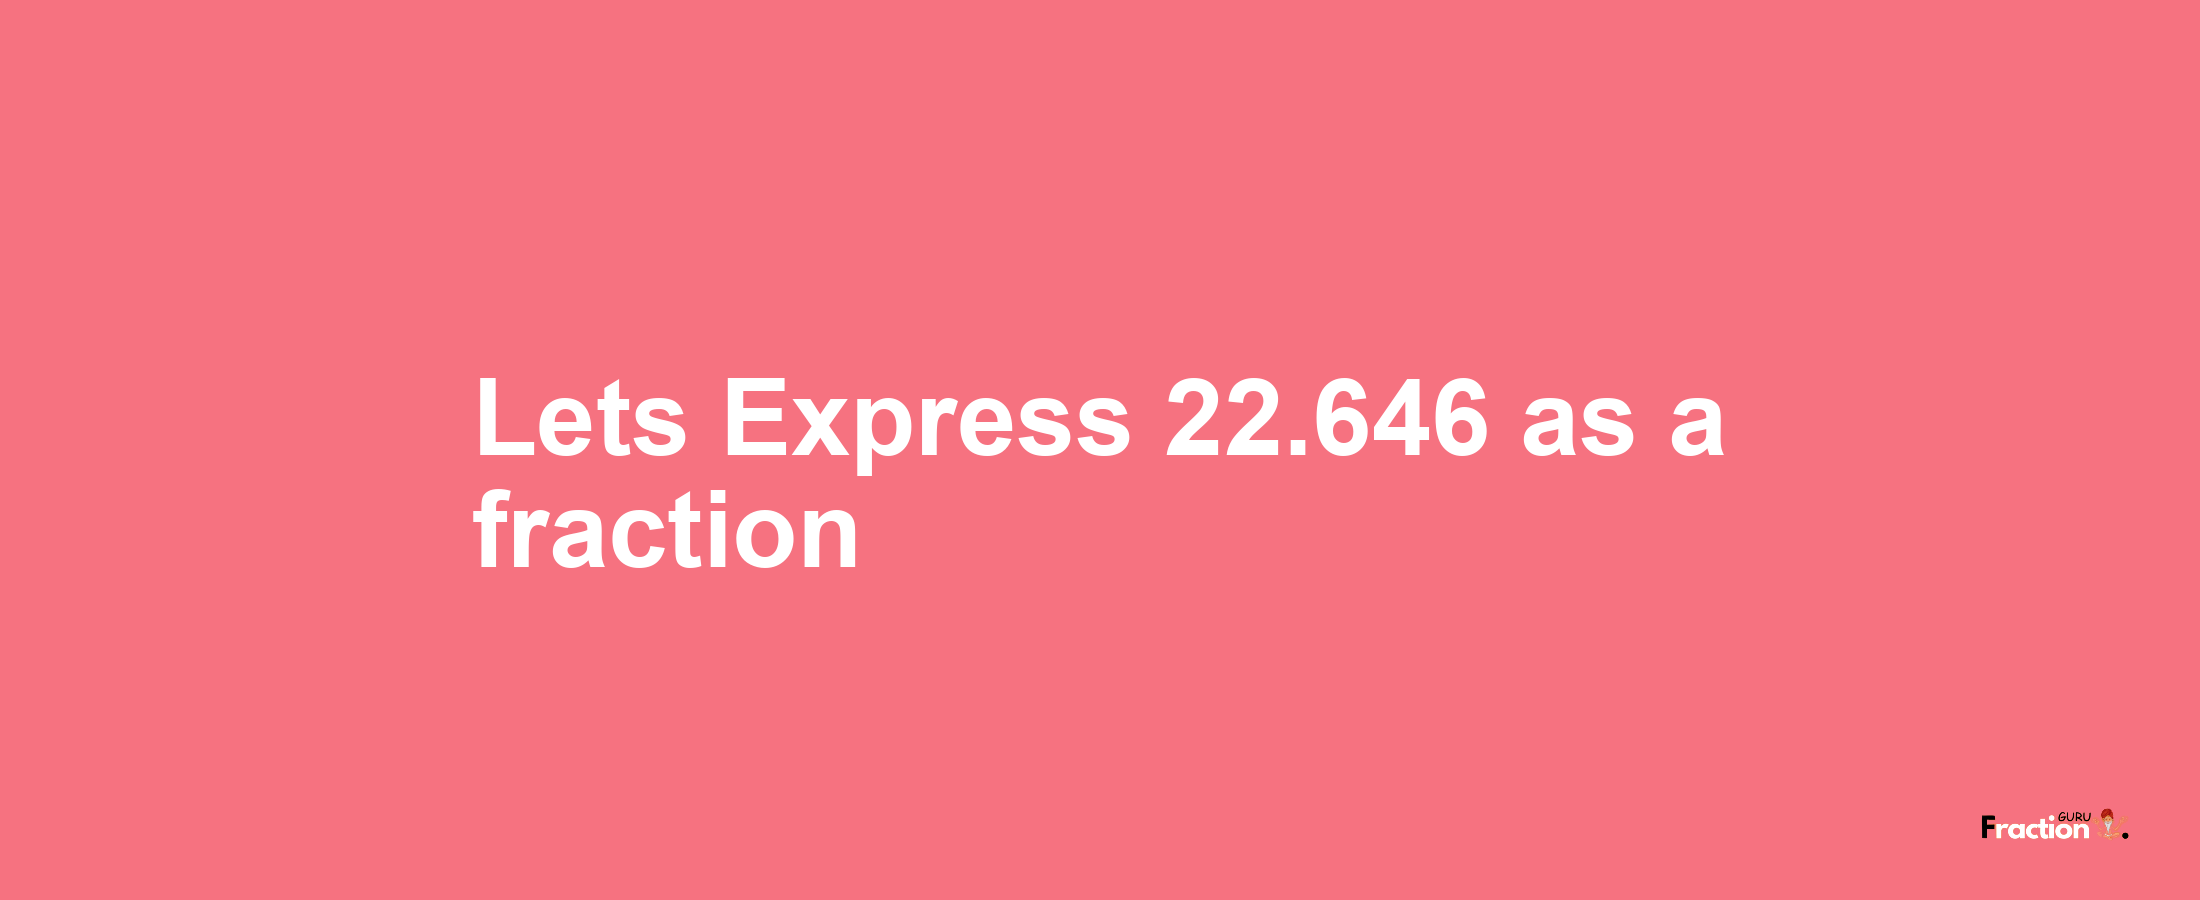 Lets Express 22.646 as afraction